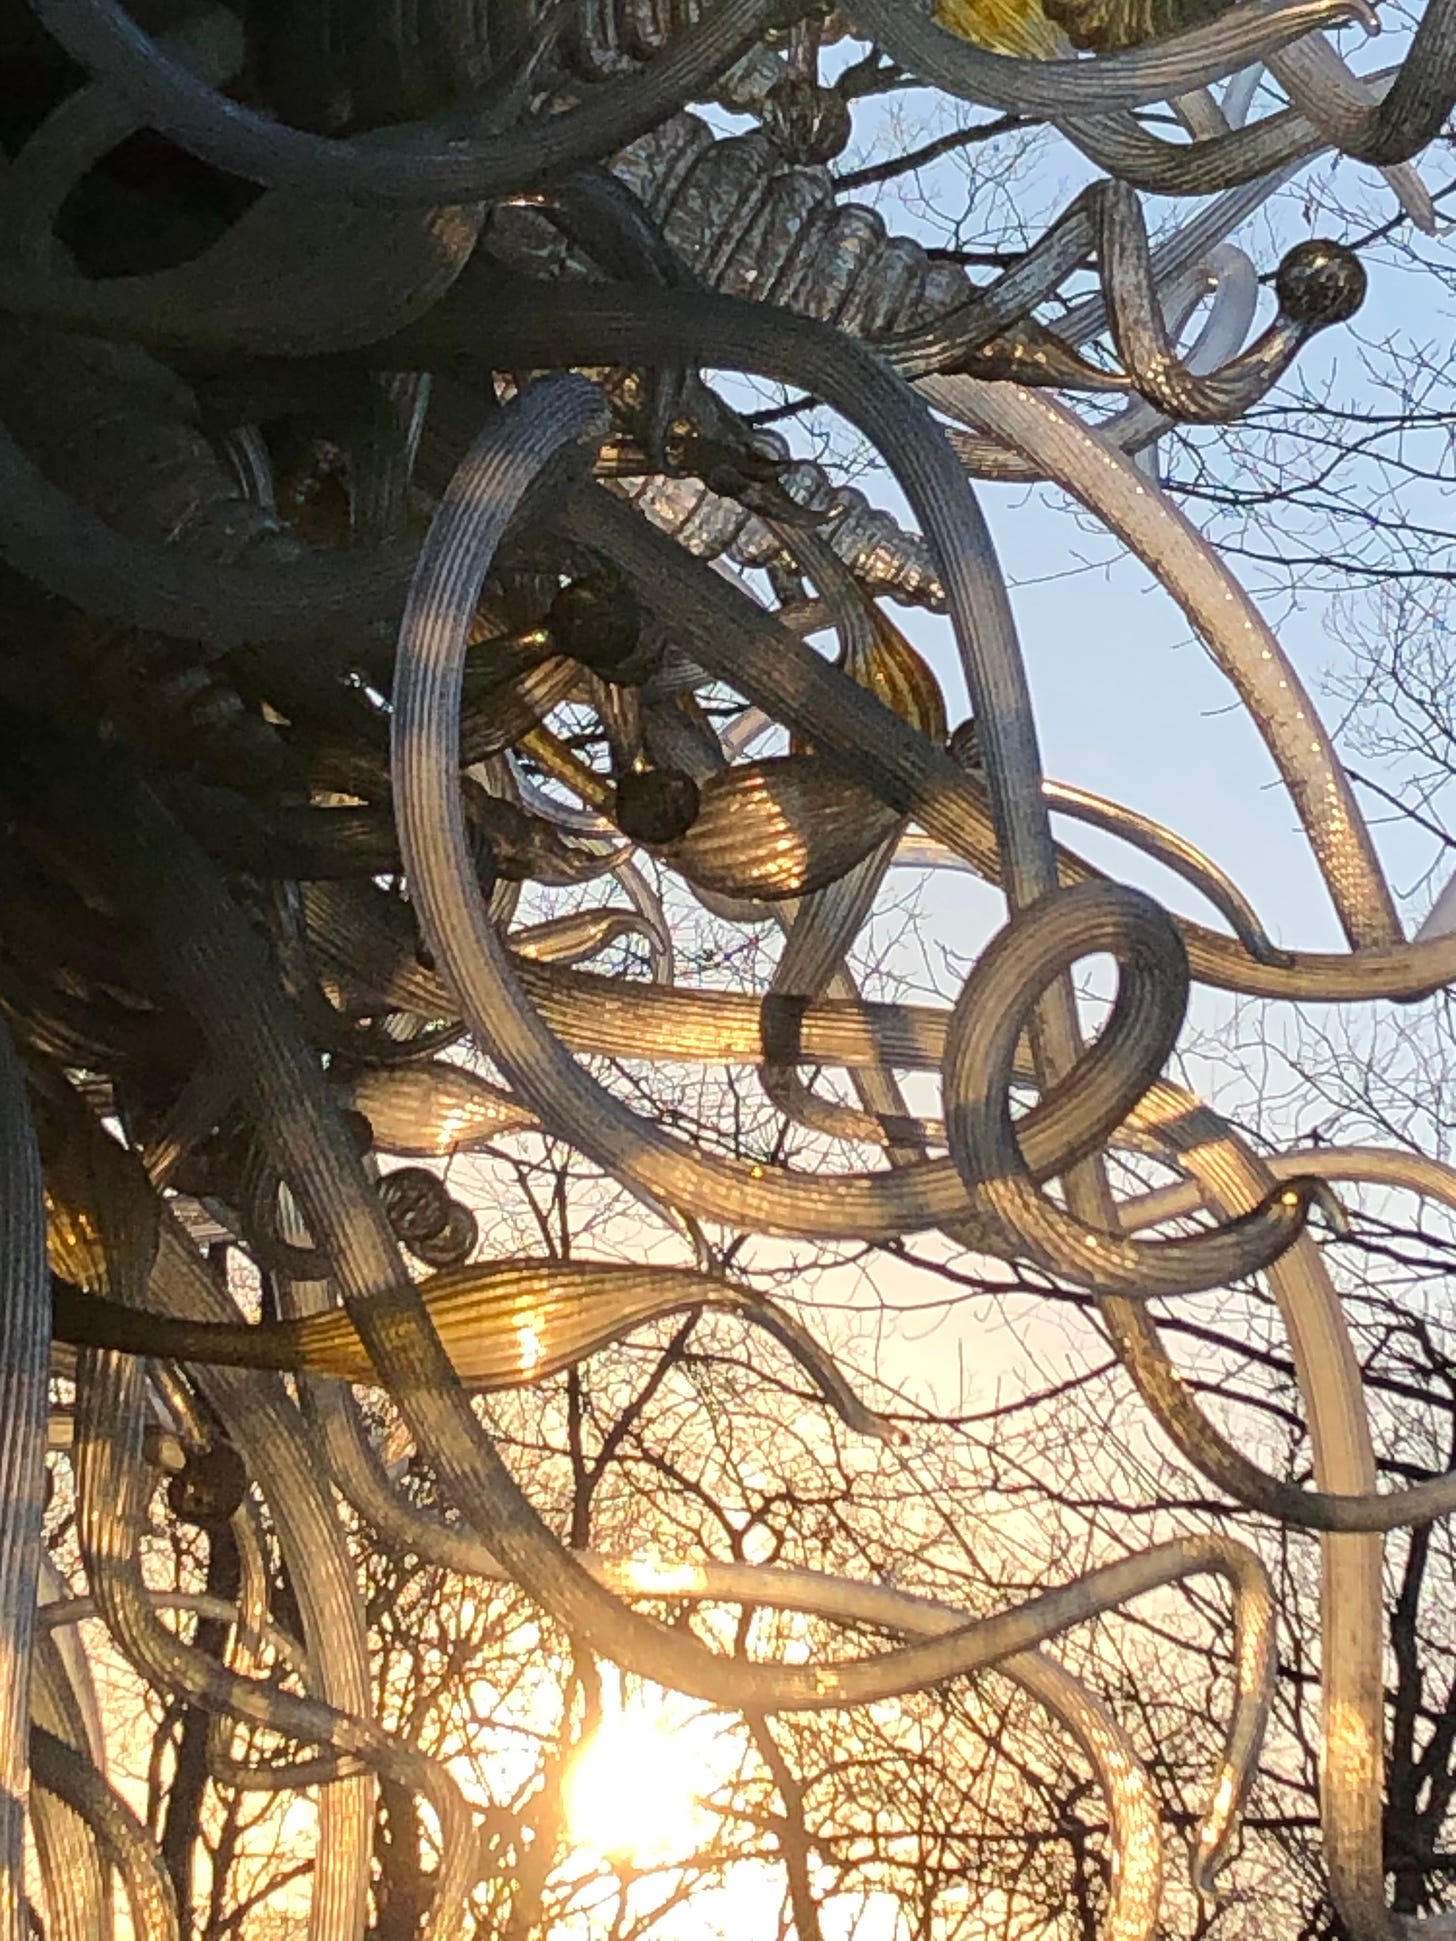 From shadow into the golden glow of sunset, a profusion of blown glass captures the afternoon's last warmth in its curlicues, twists, knobs, and tendrils.